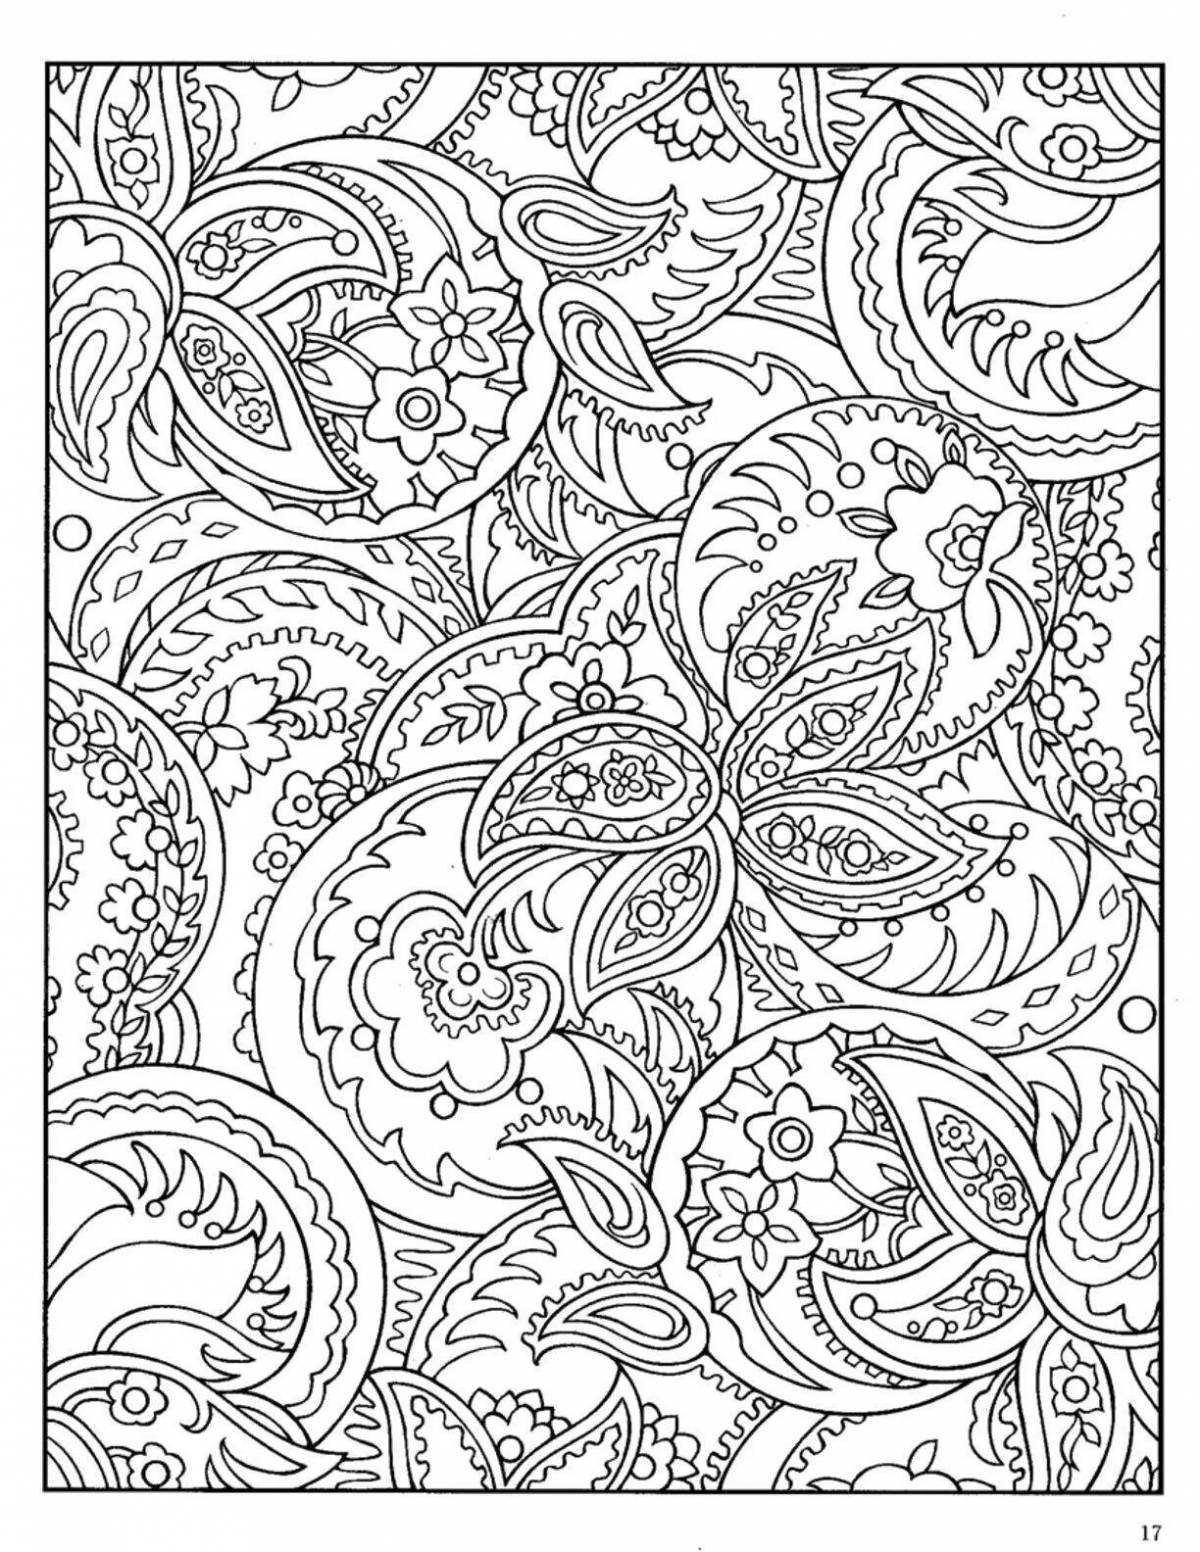 Comforting coloring patterns